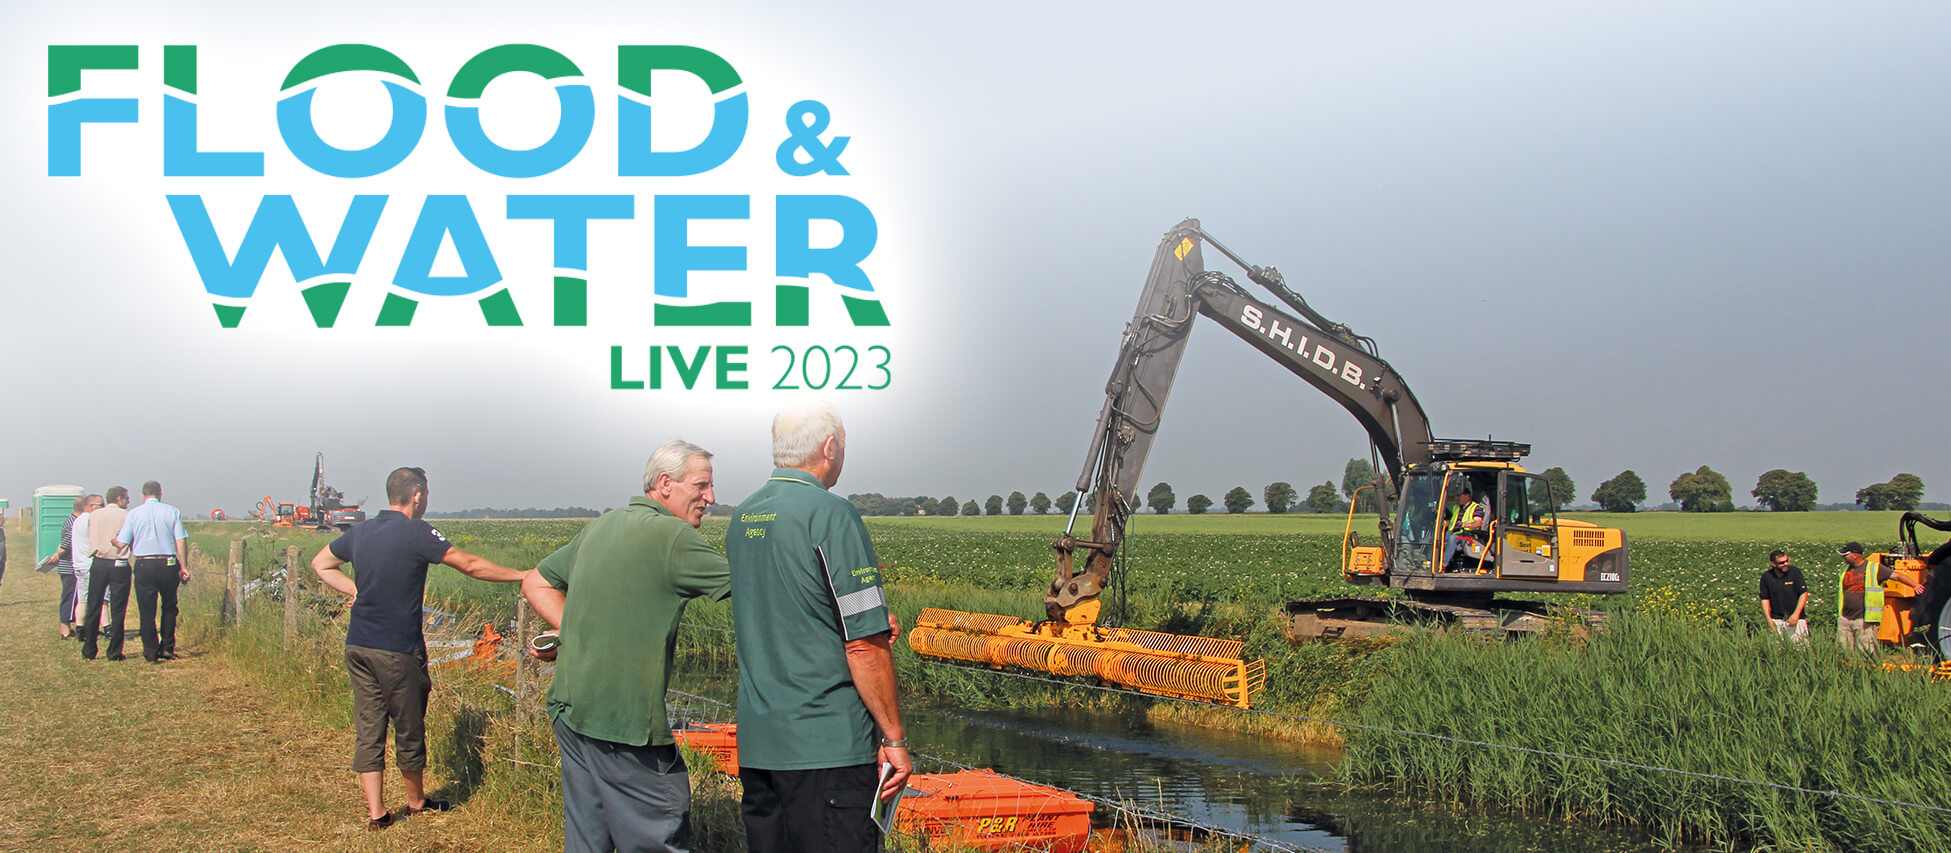 Flood and Water Live 2023